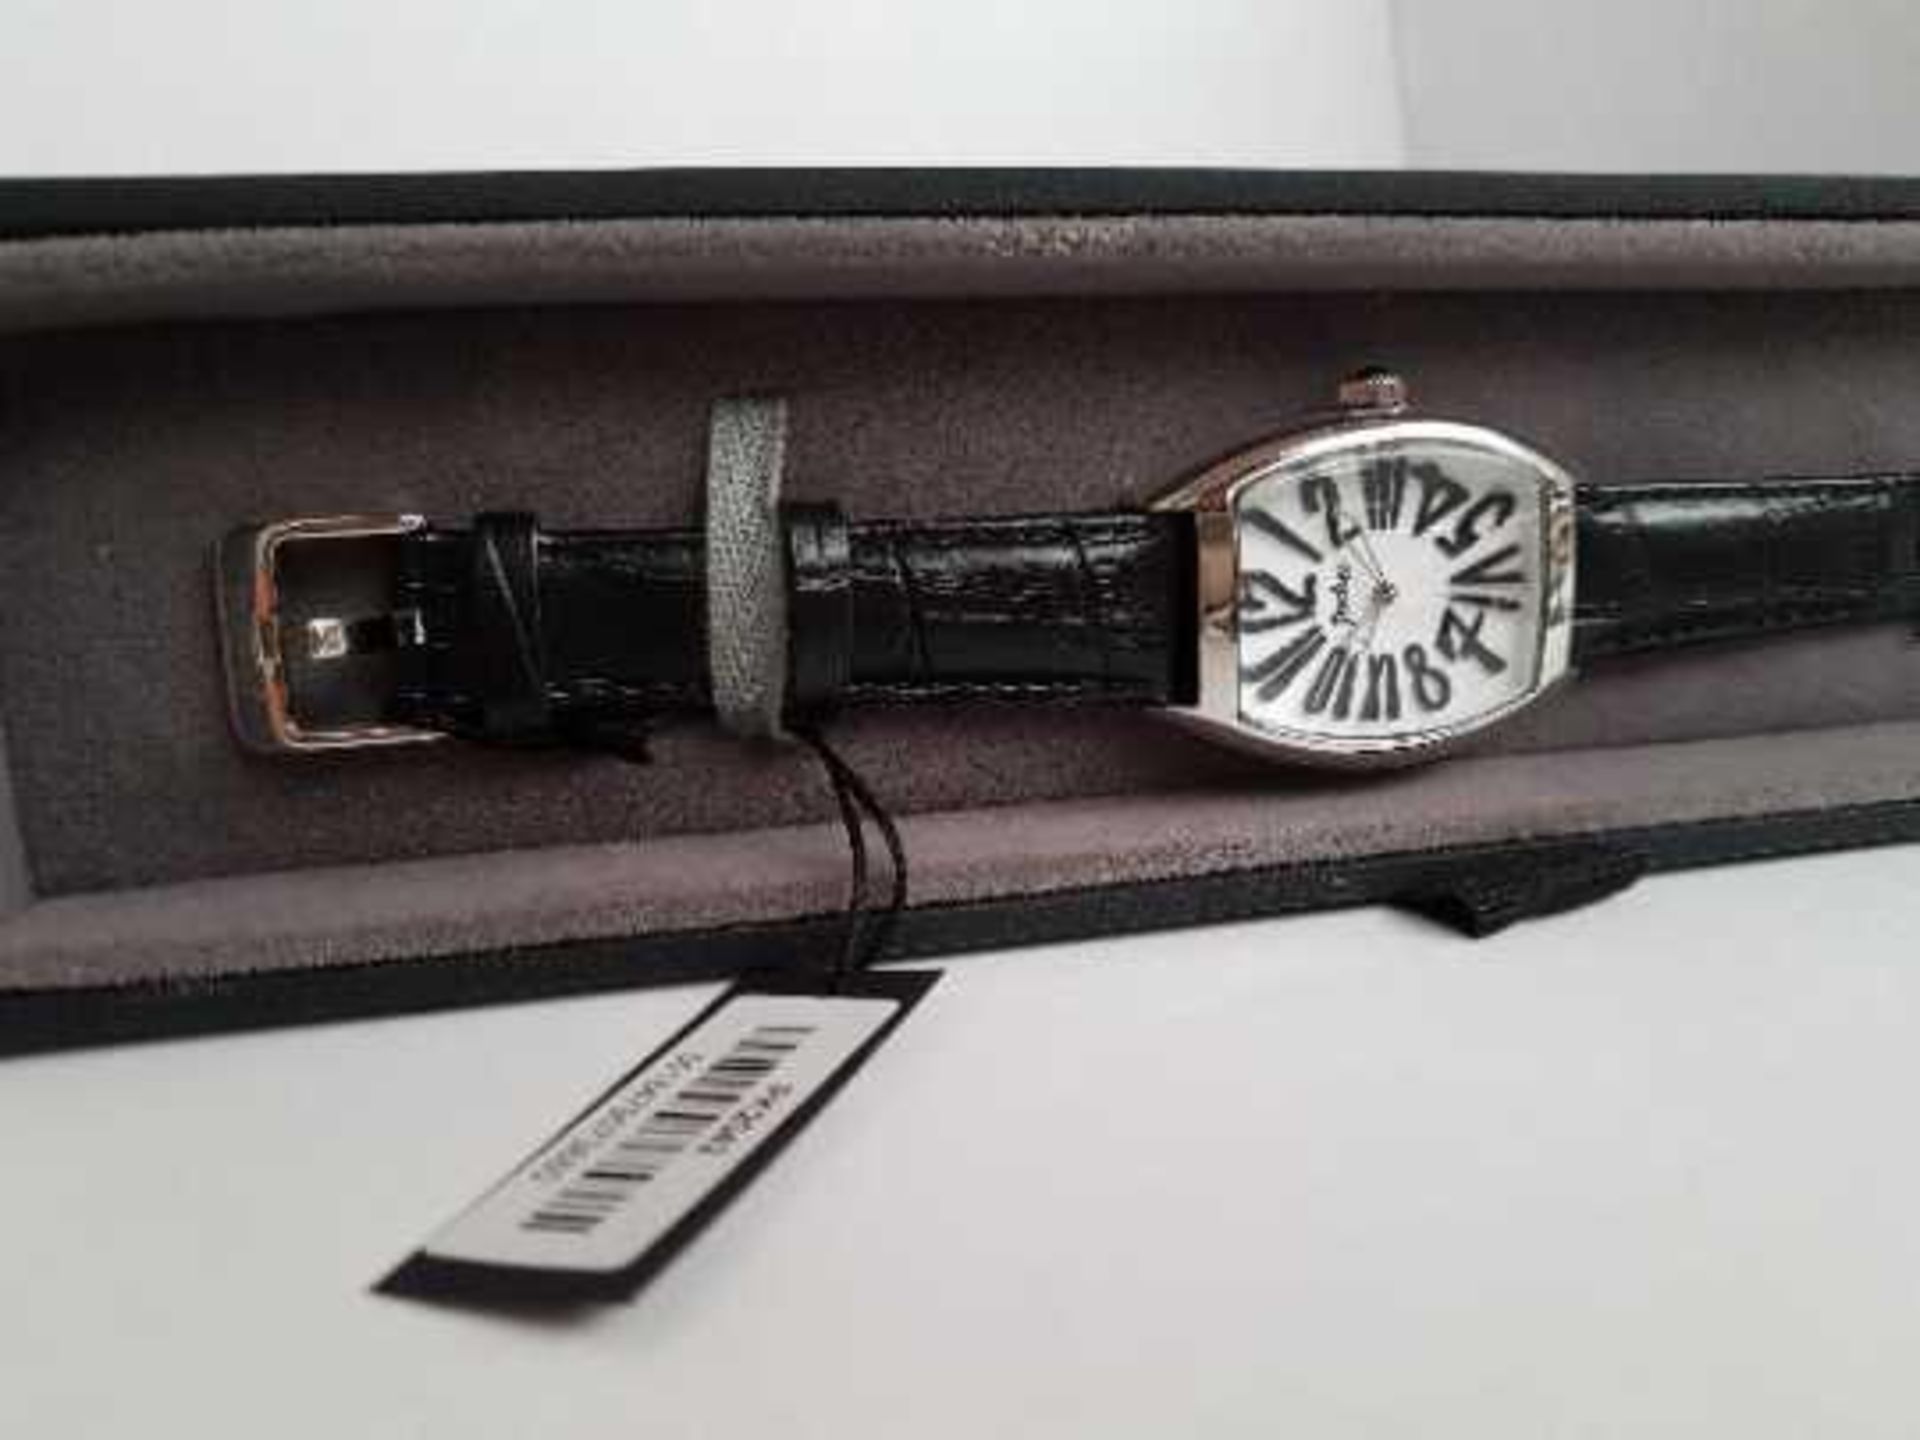 Pocket watch (PK3000) Leather strapped watch, new and Ticking in Branded case and Box with papers, - Image 2 of 2